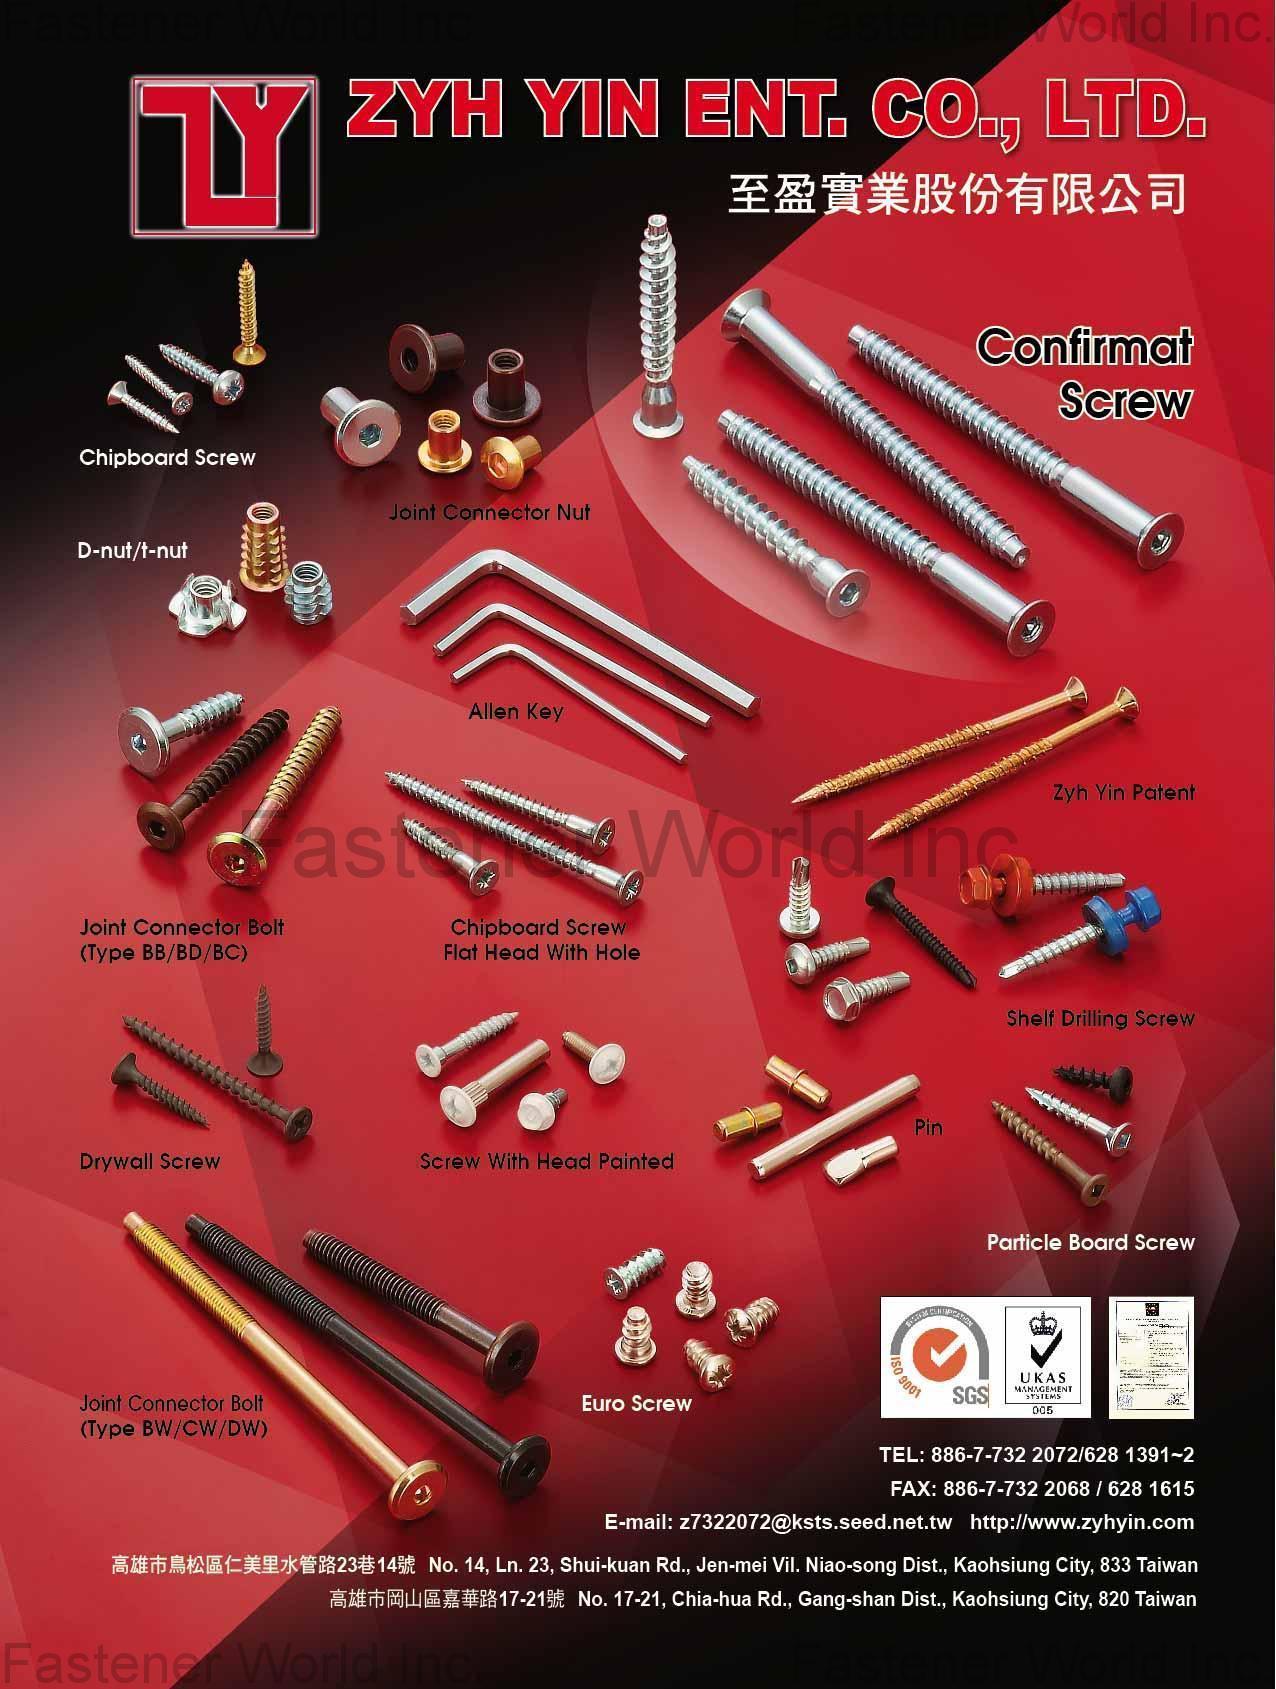 ZYH YIN ENT. CO., LTD.  , CHIPBOARD SCREW, D-NUT, T-NUT, JOINT CONNECTOR BOLT(TYPE BB/BD/BC), DRYWALL SCREW, JOINT CONNECTOR BOLT(TYPE BW/CW/DW), JOINT CONNECTOR NUT, ALLEN KEY, CHIPBOARD SCREW FLAT HEAD WITH HOLE, SCREW WITH HEAD PAINTED, EURO SCREW, CONFIRMAT SCREW, SHELF DRILLING SCREW, PIN, PARTICLE BOARD SCREW , Chipboard Screws